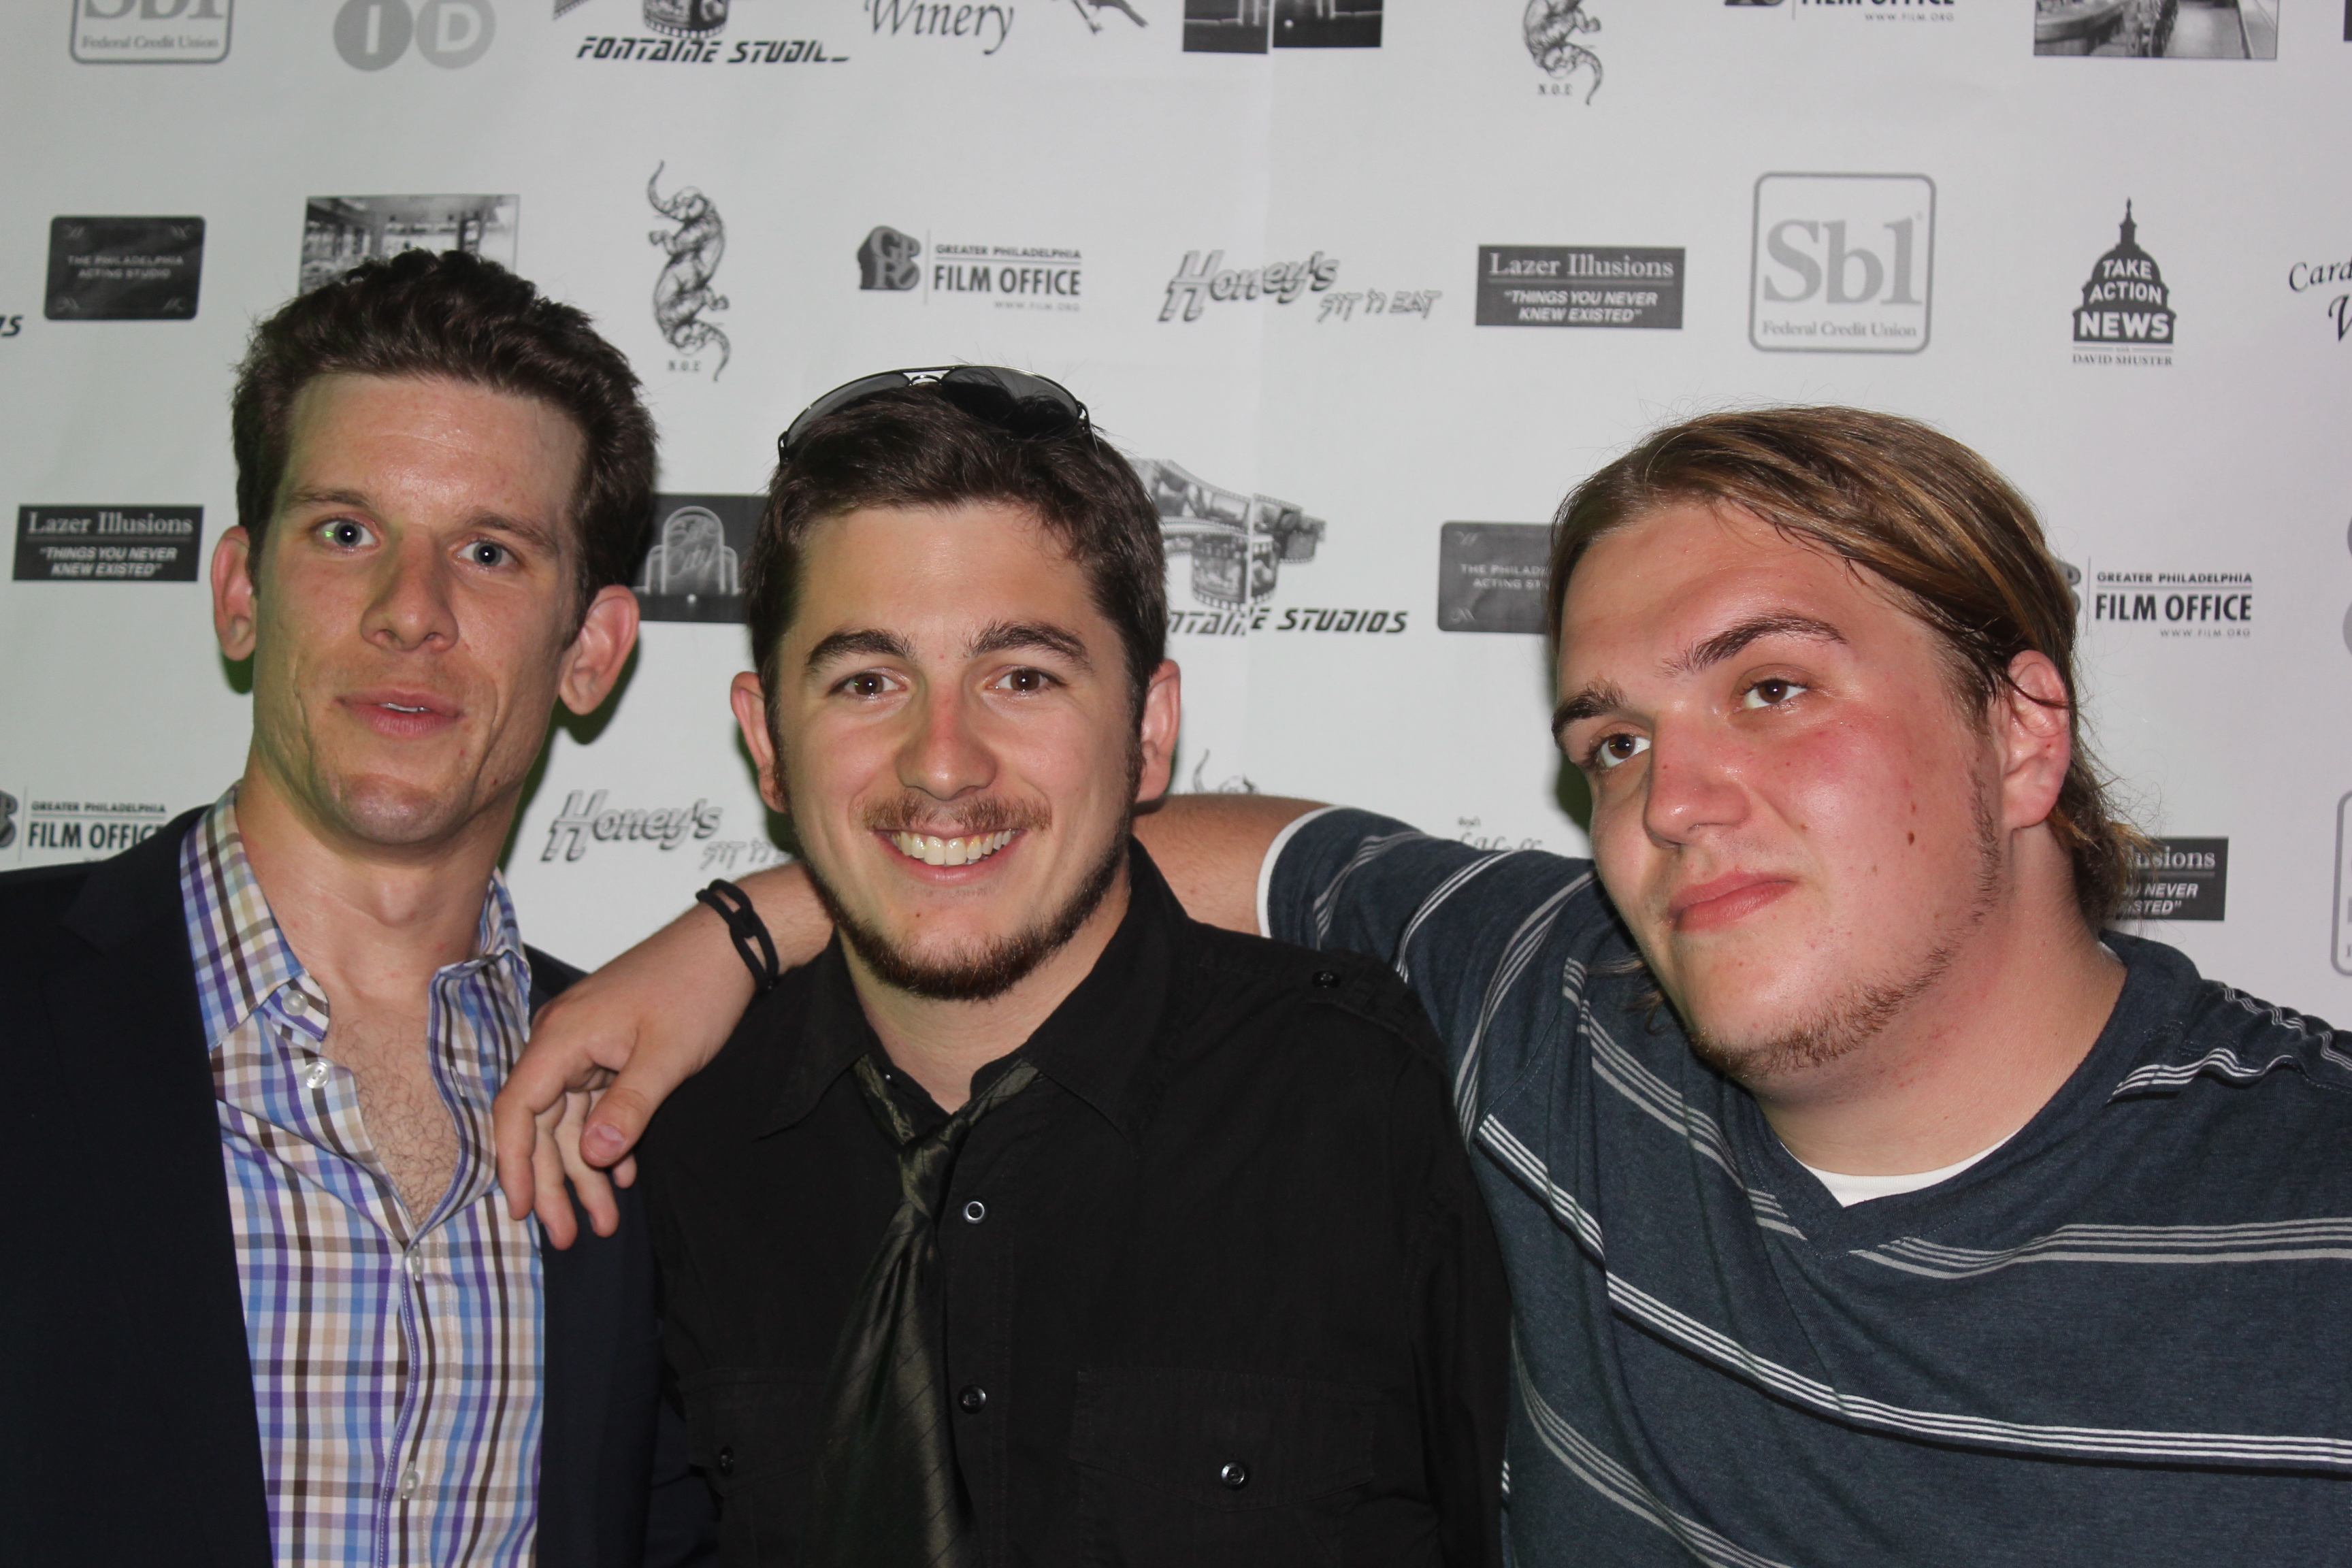 Actor Chris Harbur, Director Kyle Thompson and Producer Chad Gurdgiel at The Descending premiere in Philadelphia